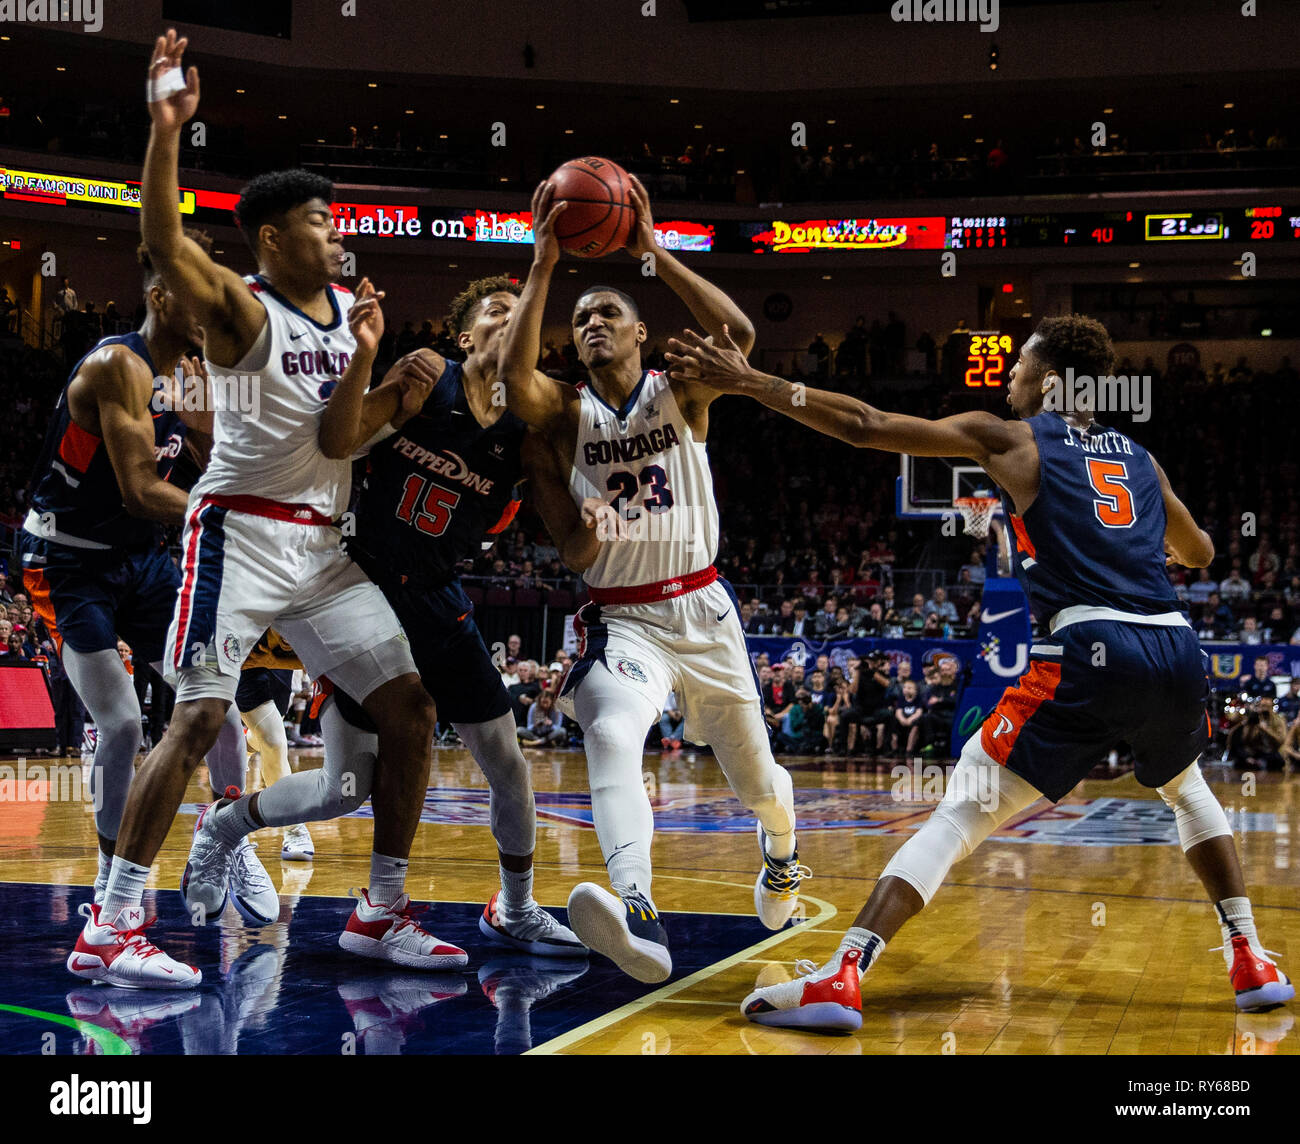 Mar 11 2019 Las Vegas, NV, U.S.A. Gonzaga guard Zach Norvell Jr. (23) drives to the basket during the NCAA West Coast Conference Men's Basketball Tournament semi -final between the Pepperdine Wave and the Gonzaga Bulldogs 100-74 win at Orleans Arena Las Vegas, NV. Thurman James/CSM Stock Photo